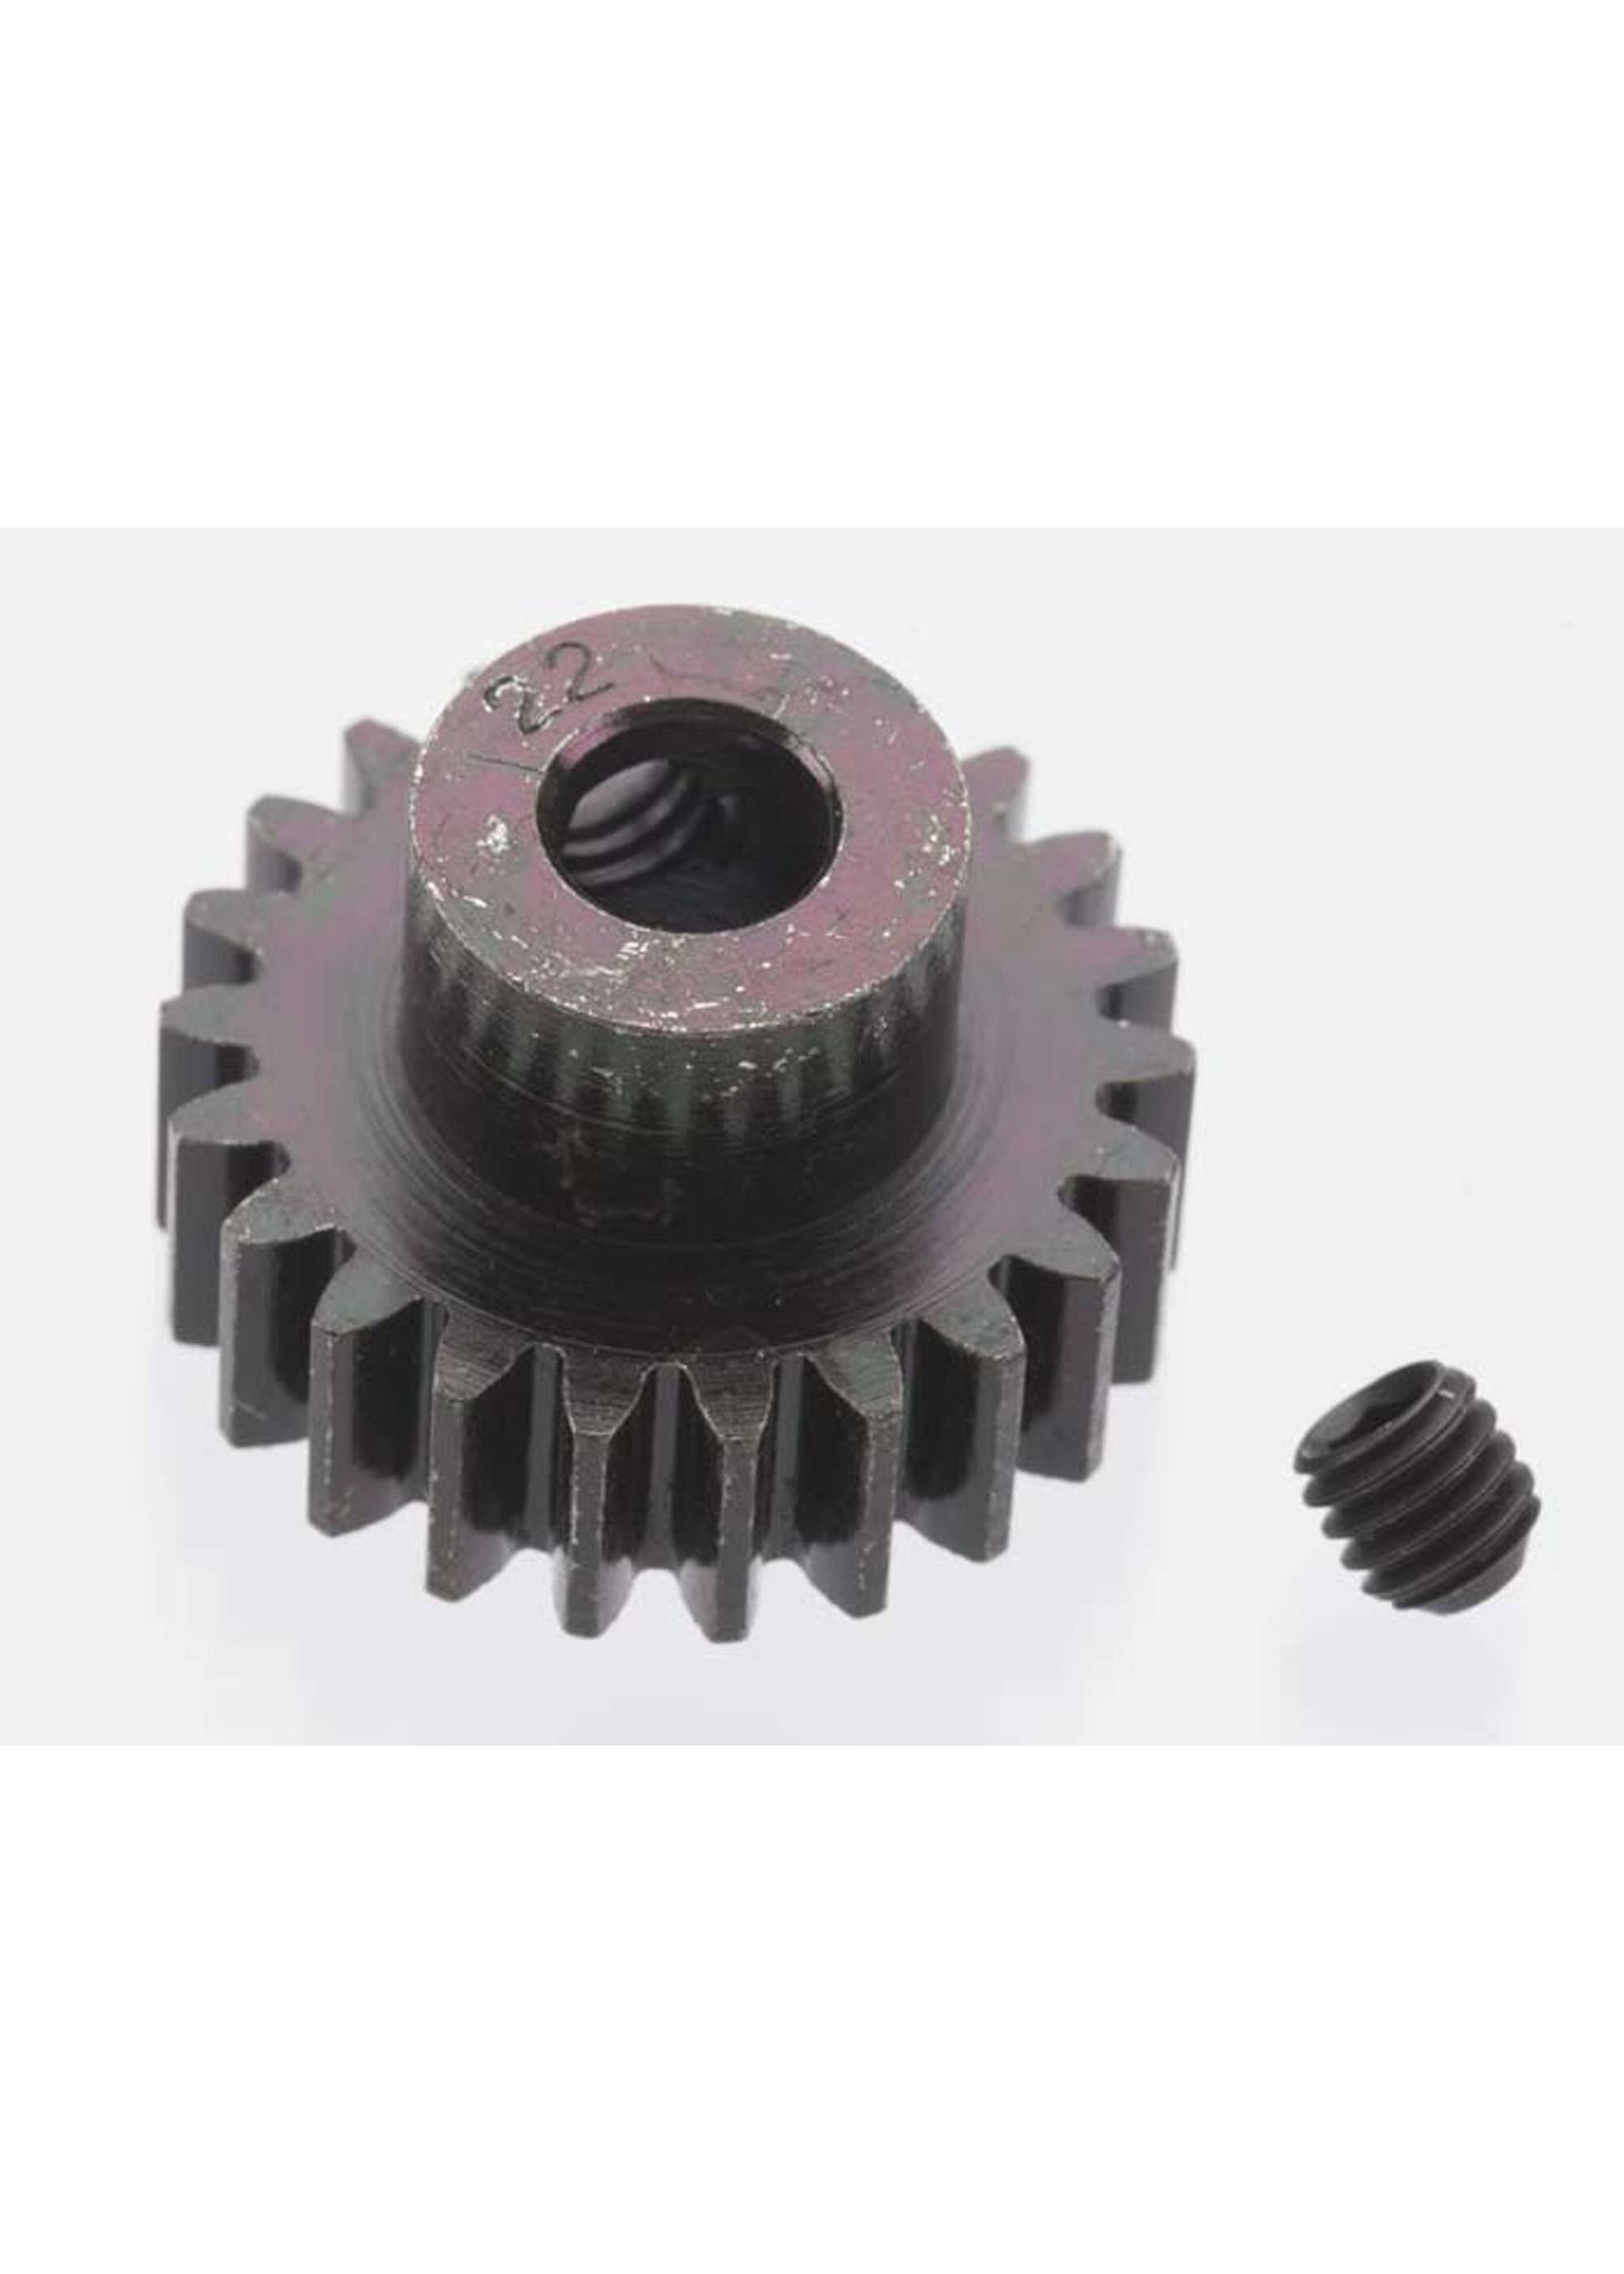 Robinson Racing Products RRP8622 Robinson Racing Products Extra Hard Blackened Steel .8 Mod Pinion Gear w/5mm Bore (22T)